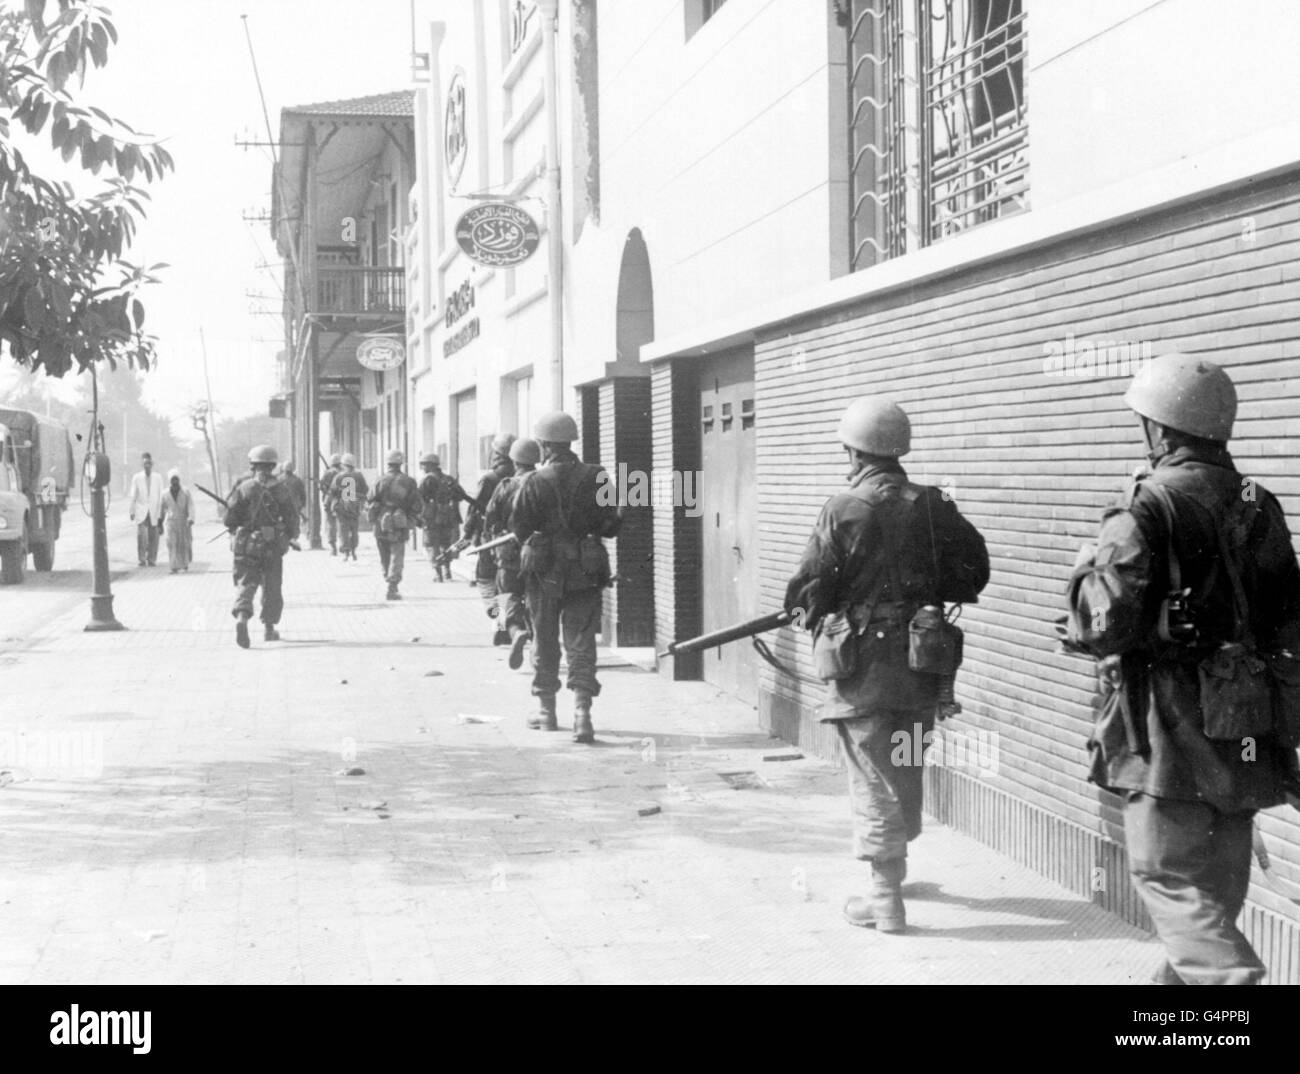 SUEZ 1956: Strung out close to the buildings, an Allied patrol moves through an almost deserted street in Port Said, key town at the northern end of the Suez Canal, held by the British and French troops. Stock Photo